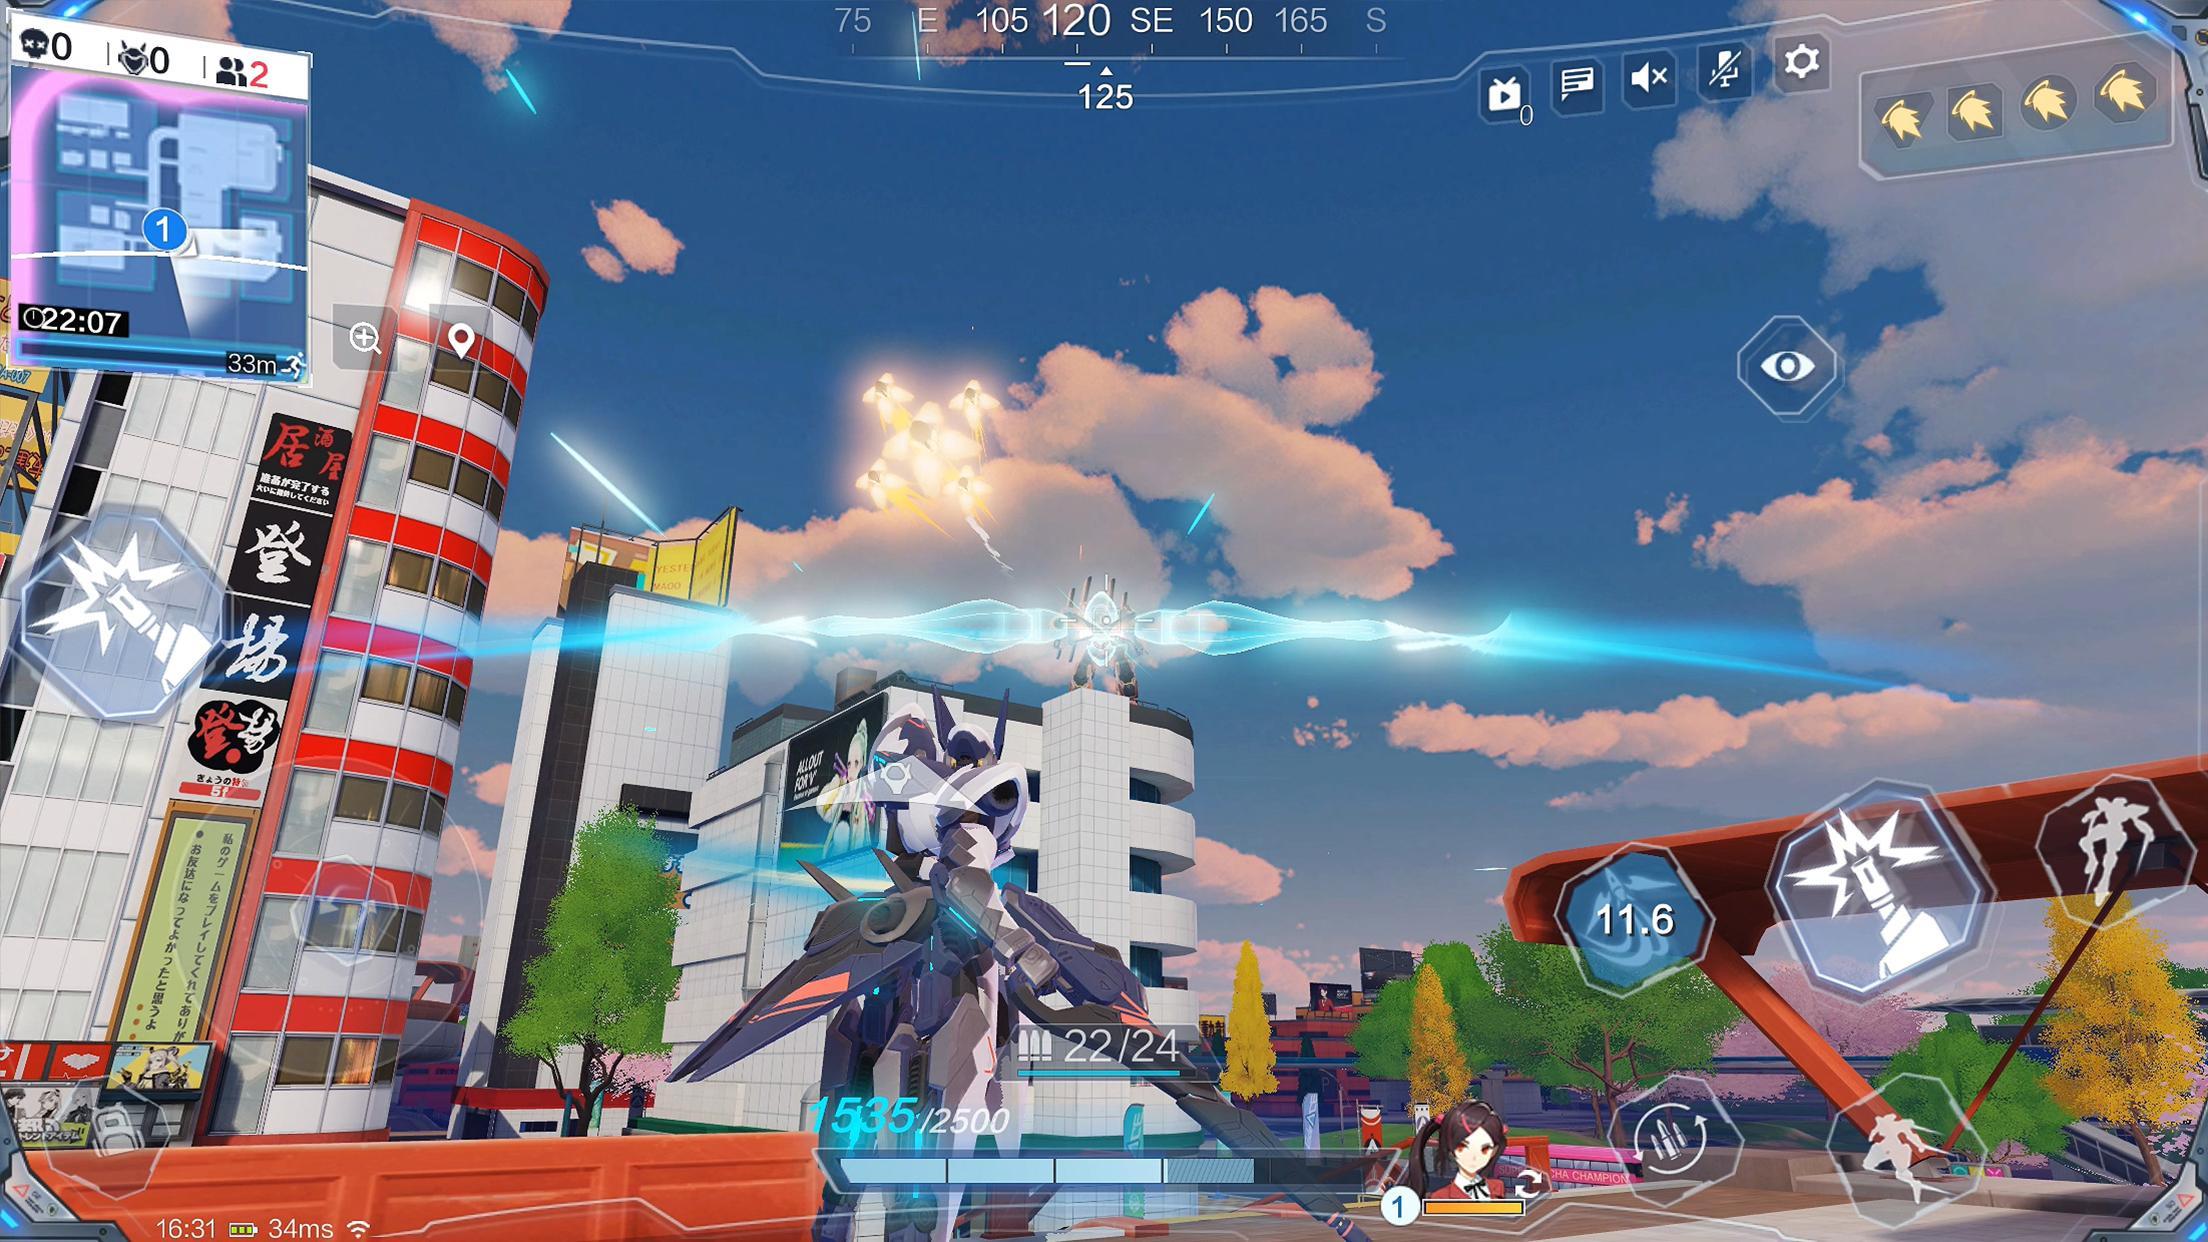 Super Mecha Champions for Android - APK Download